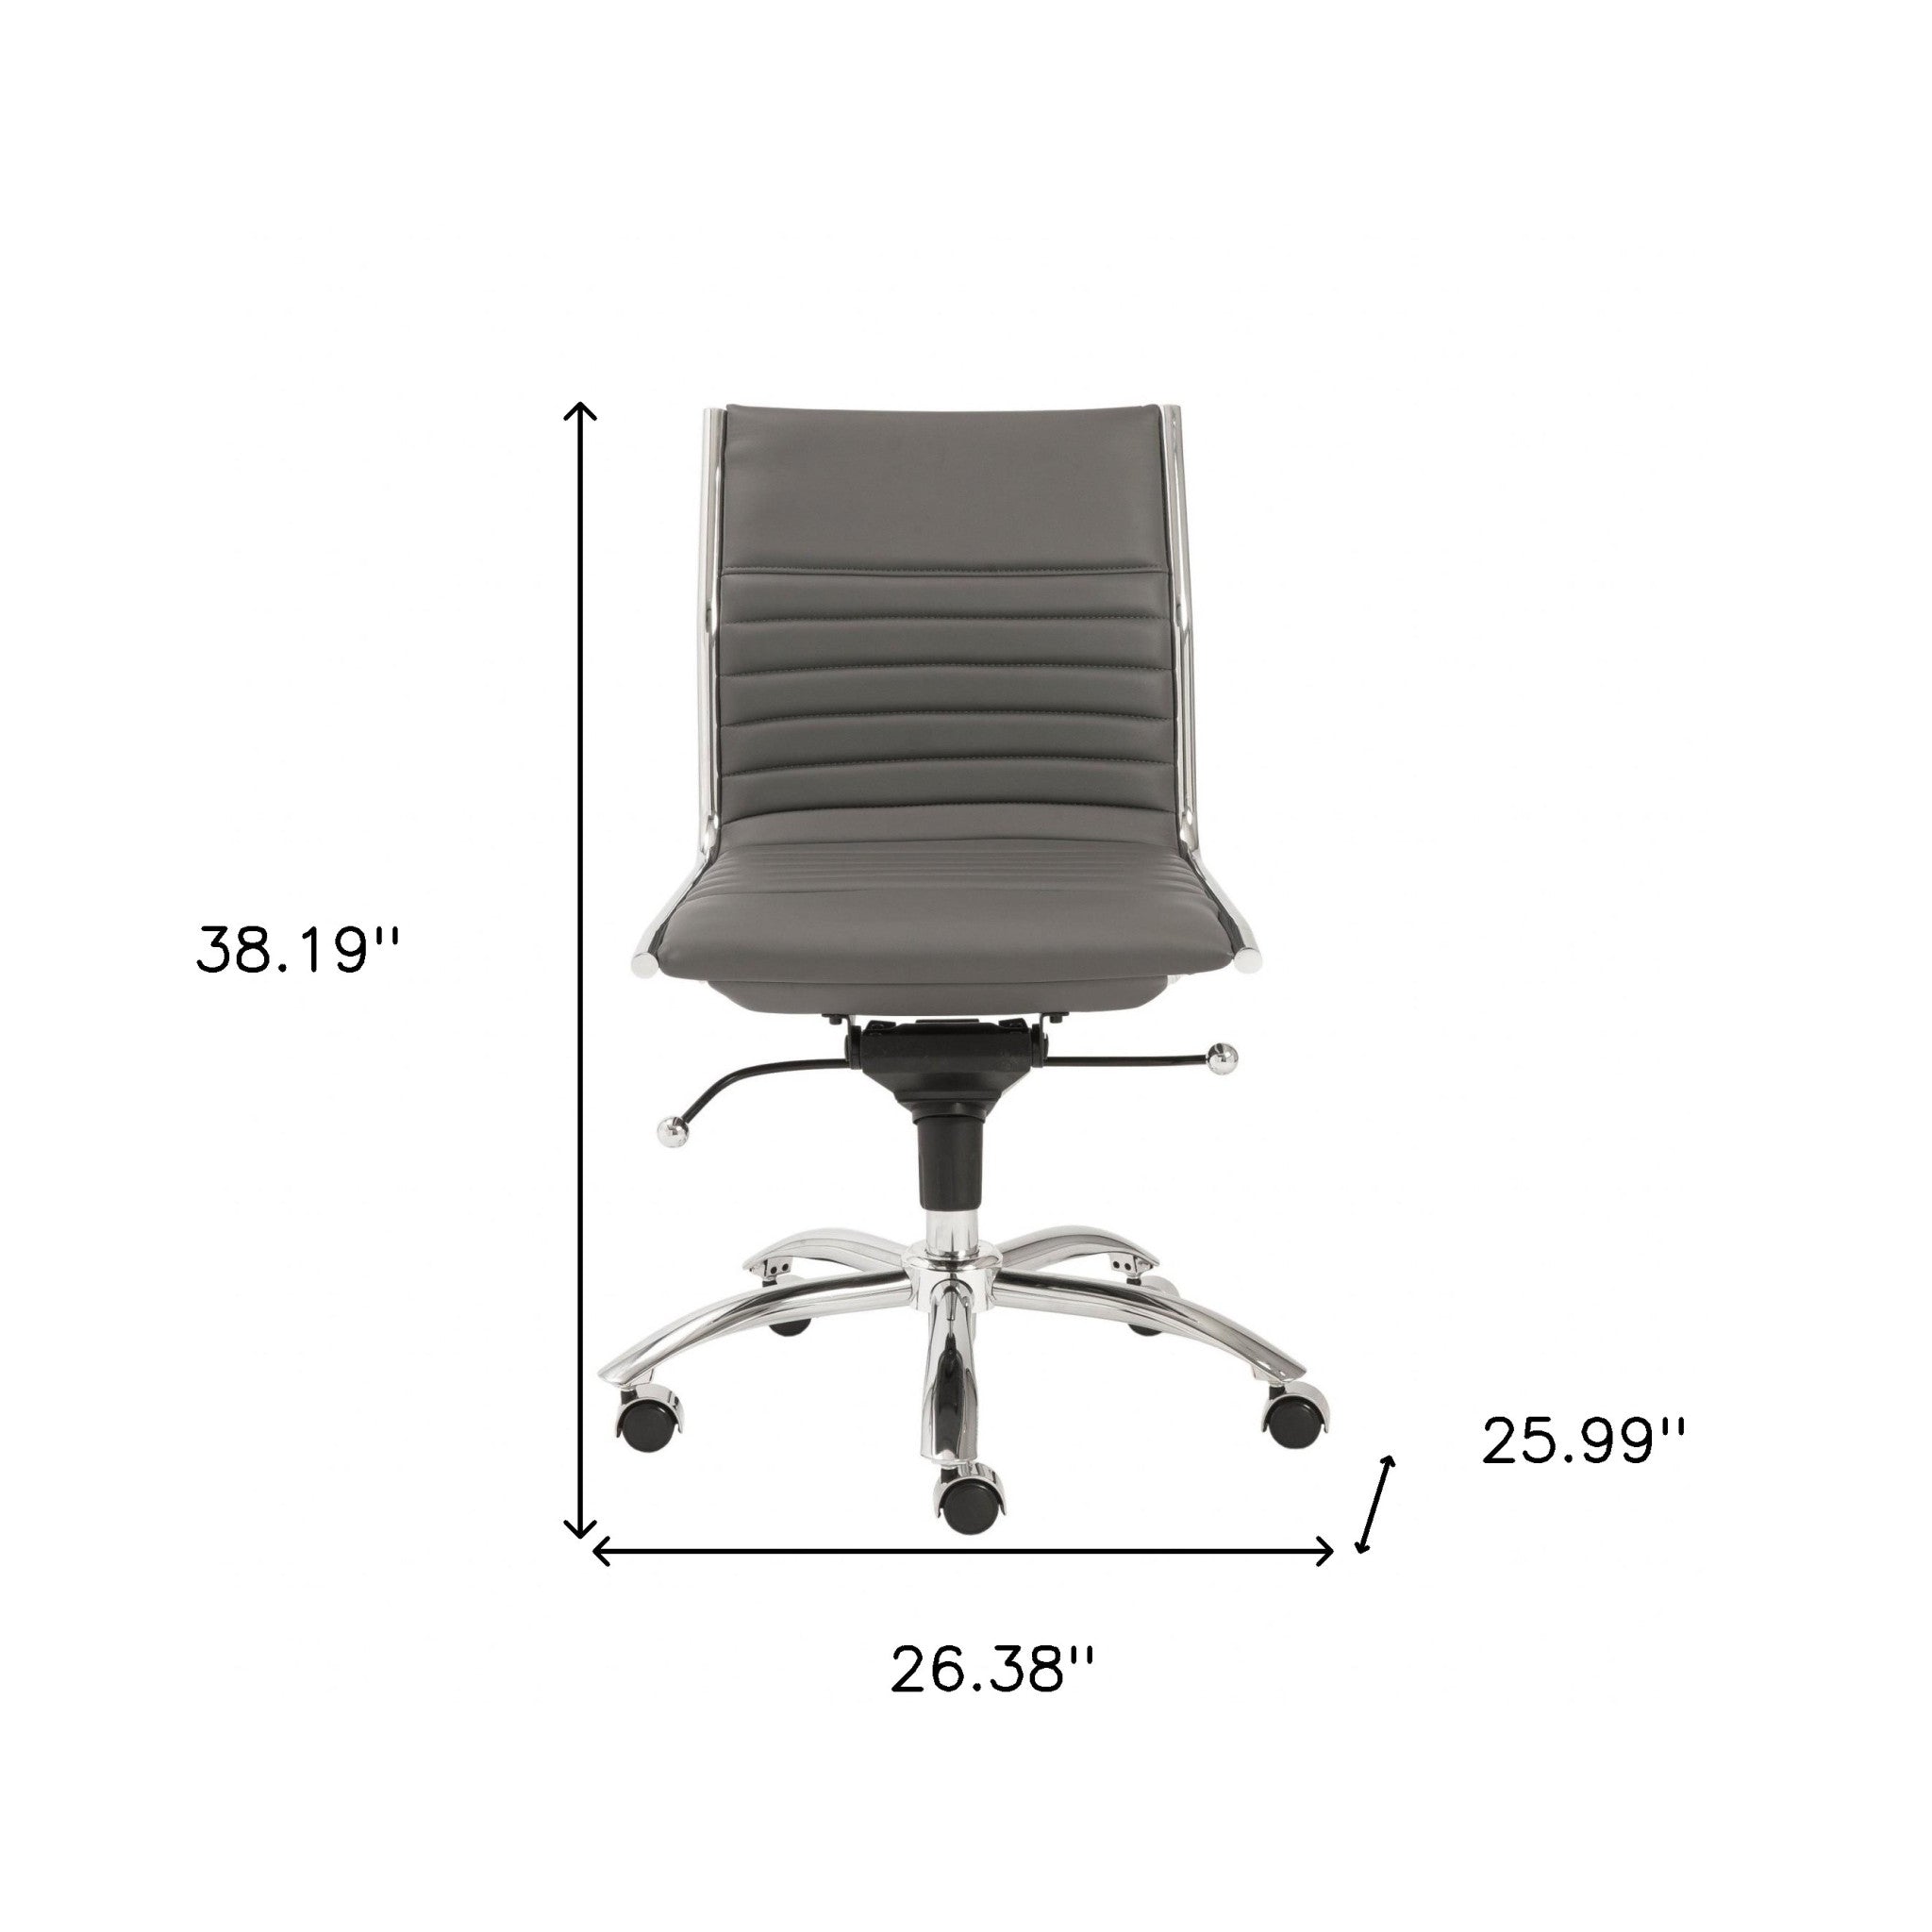 26.38" X 25.99" X 38.19" Low Back Office Chair Without Armrests In Gray With Chromed Steel Base